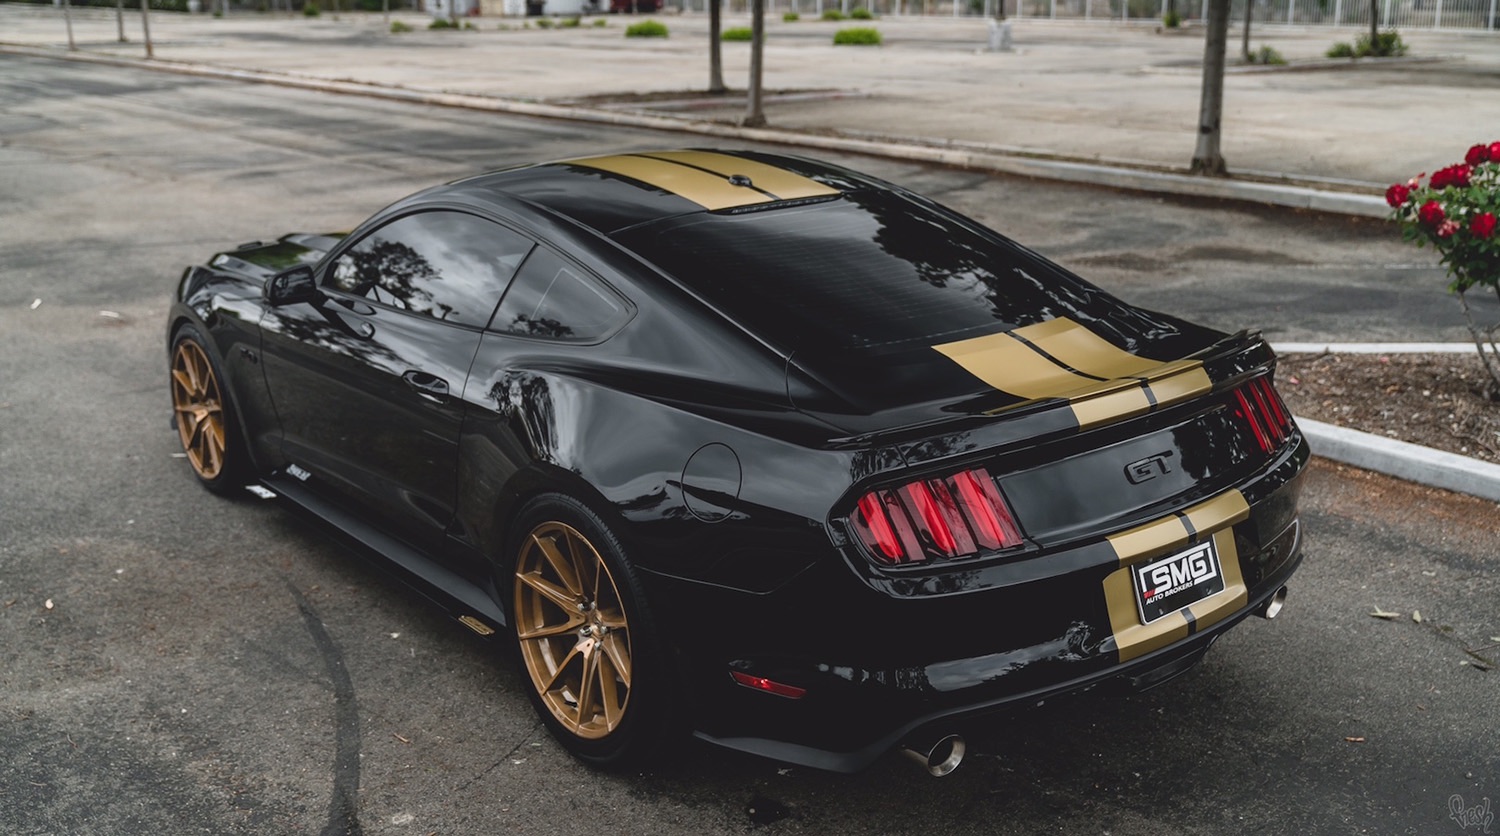 Ford-Mustang-S550-Black-Gold-ZF03-7